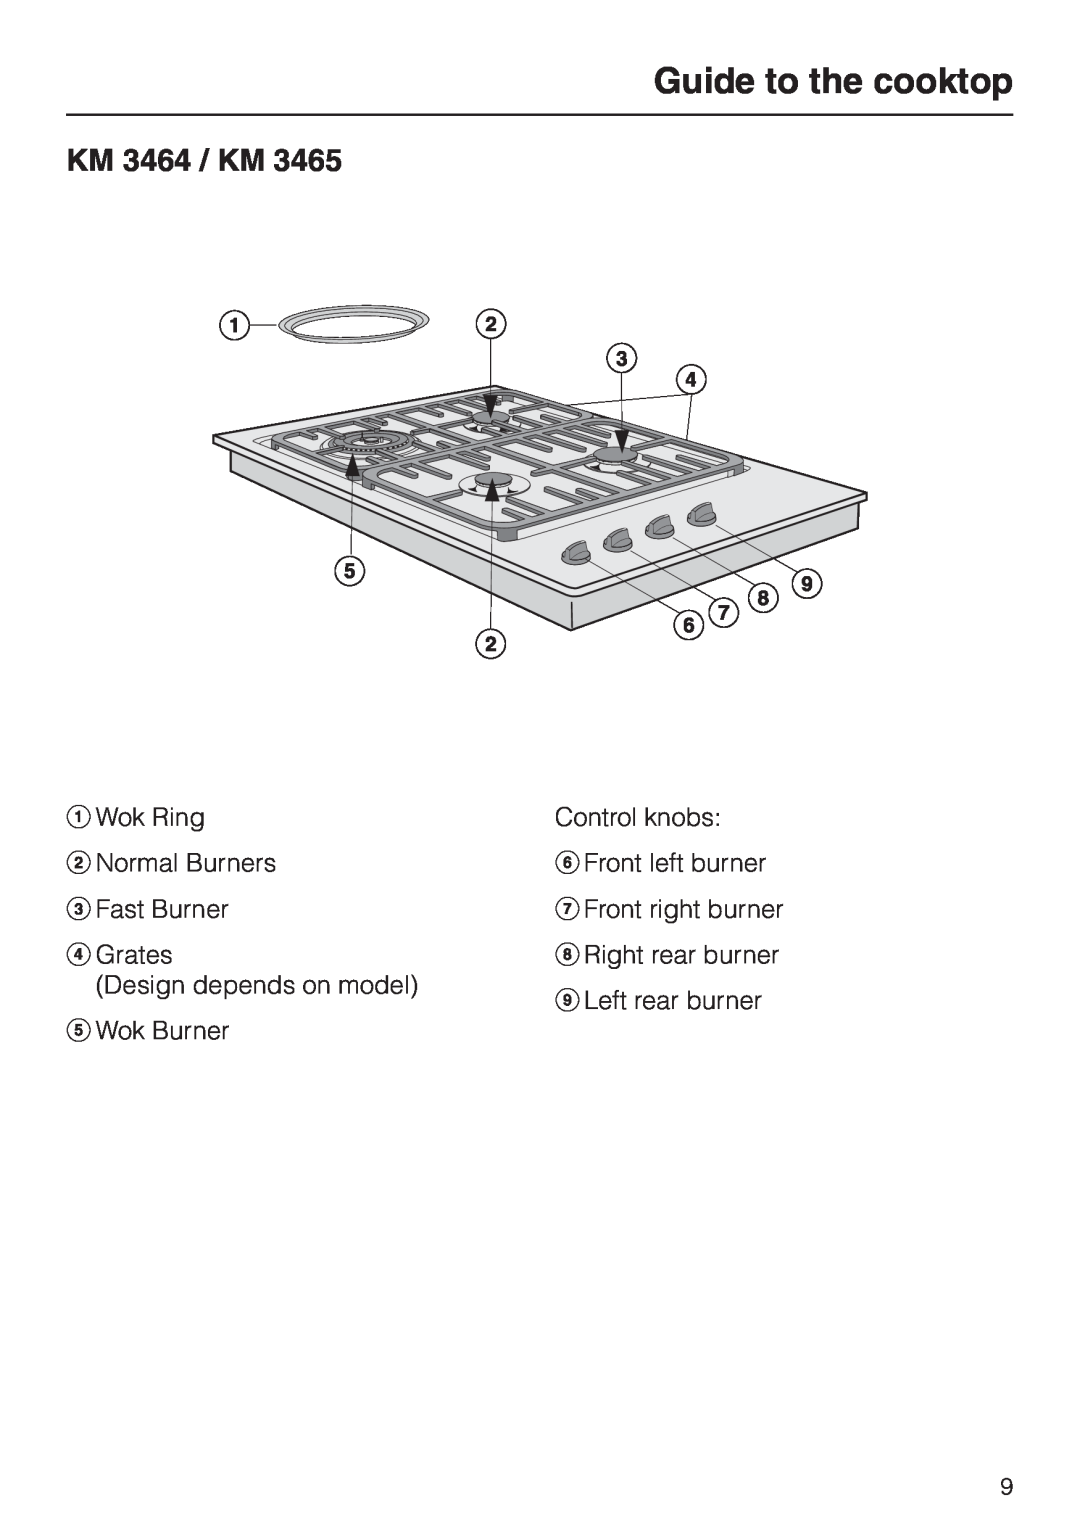 Miele KM 3474, KM 3485, KM 3484 installation instructions Guide to the cooktop, KM 3464 / KM 